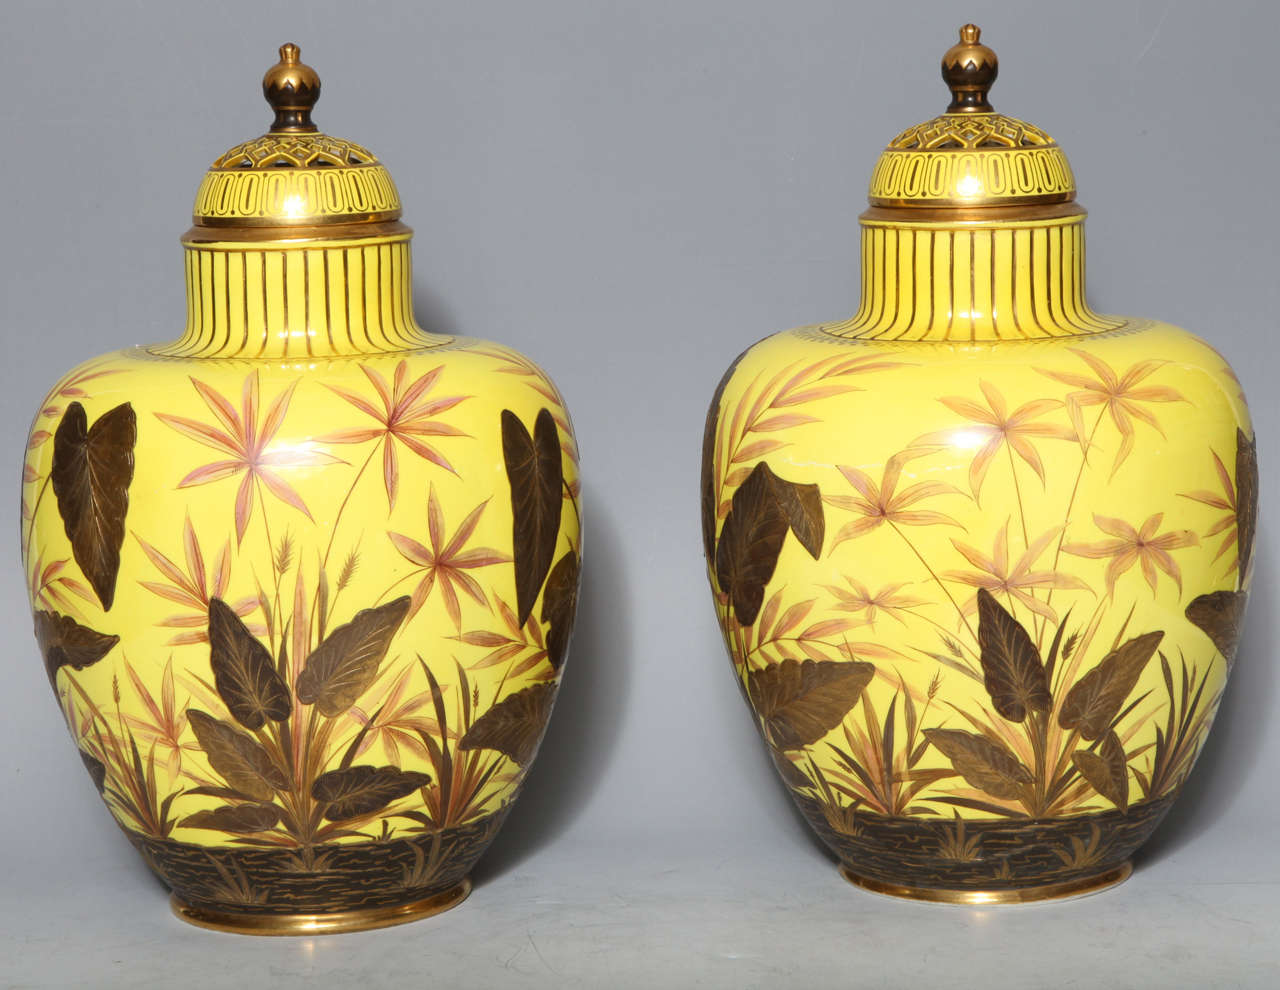 A very unusual pair of antique English Royal Crown Derby porcelain, yellow ground covered potpourri vases, finely painted with multicolored 24-karat gold and enamel. Each finely signed inside the reticulated cover in red.
This color porcelain was